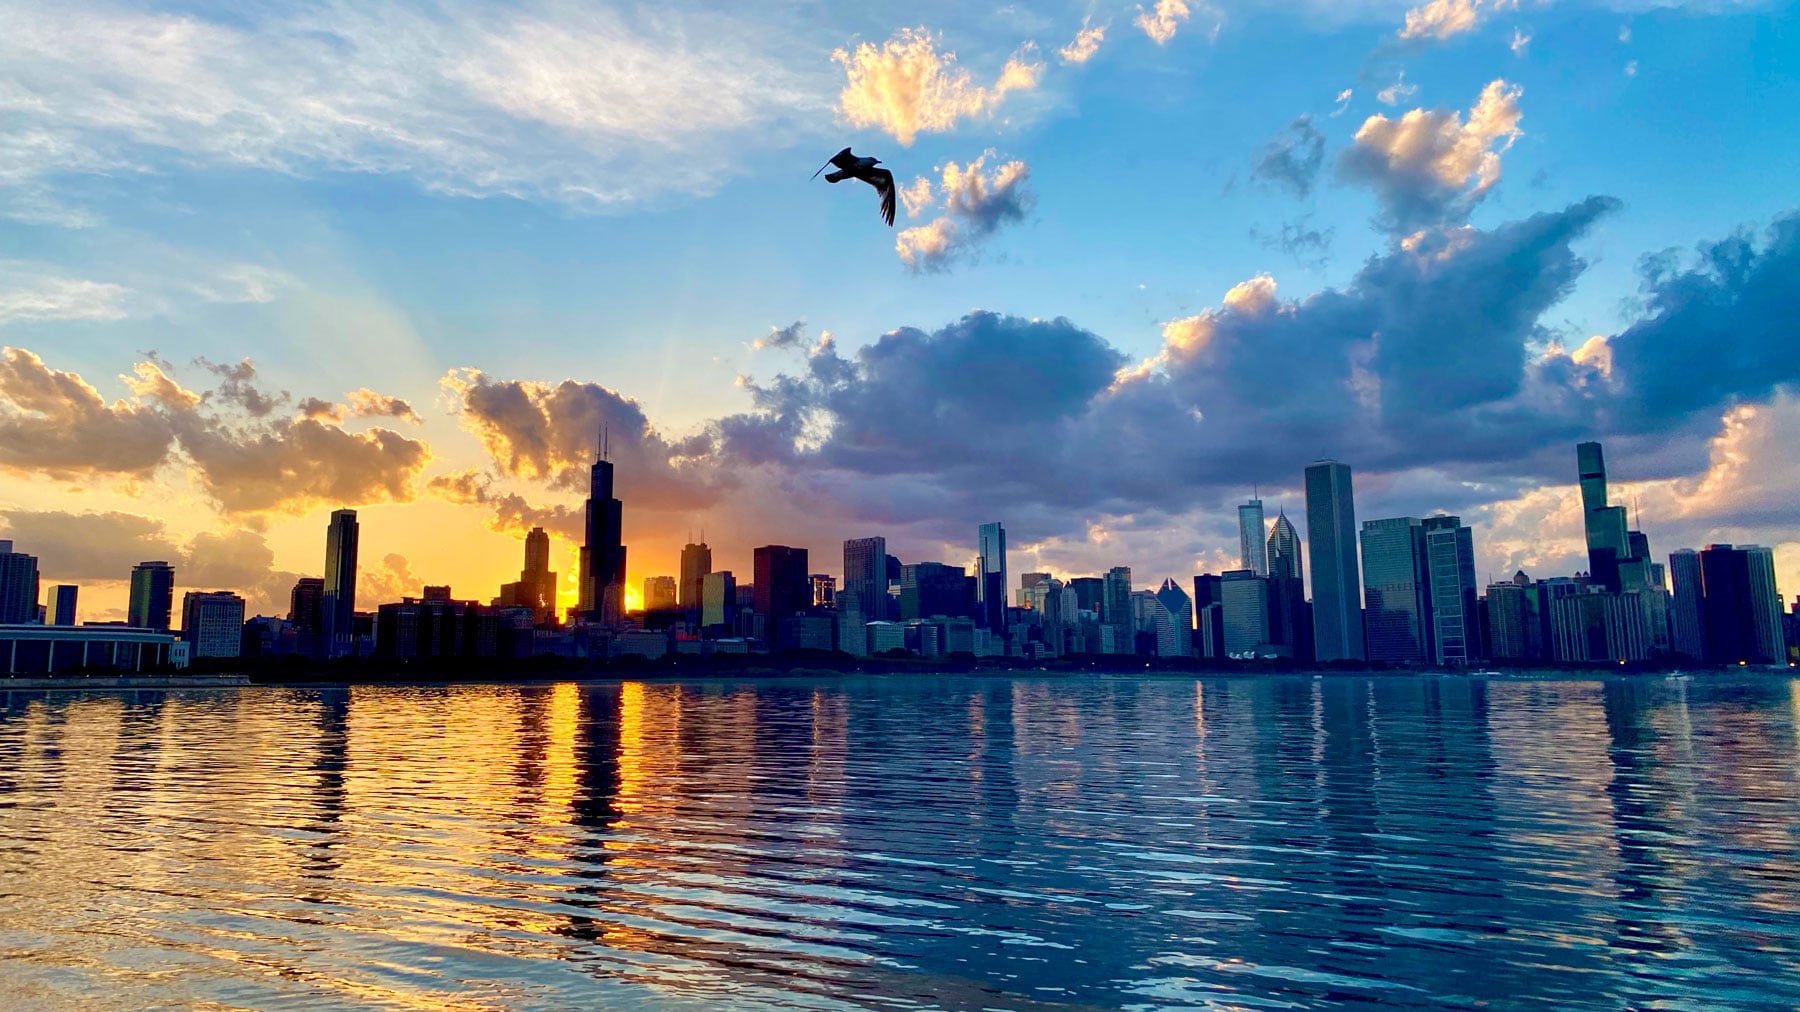 Chicago skyline at sunset with bird flying over